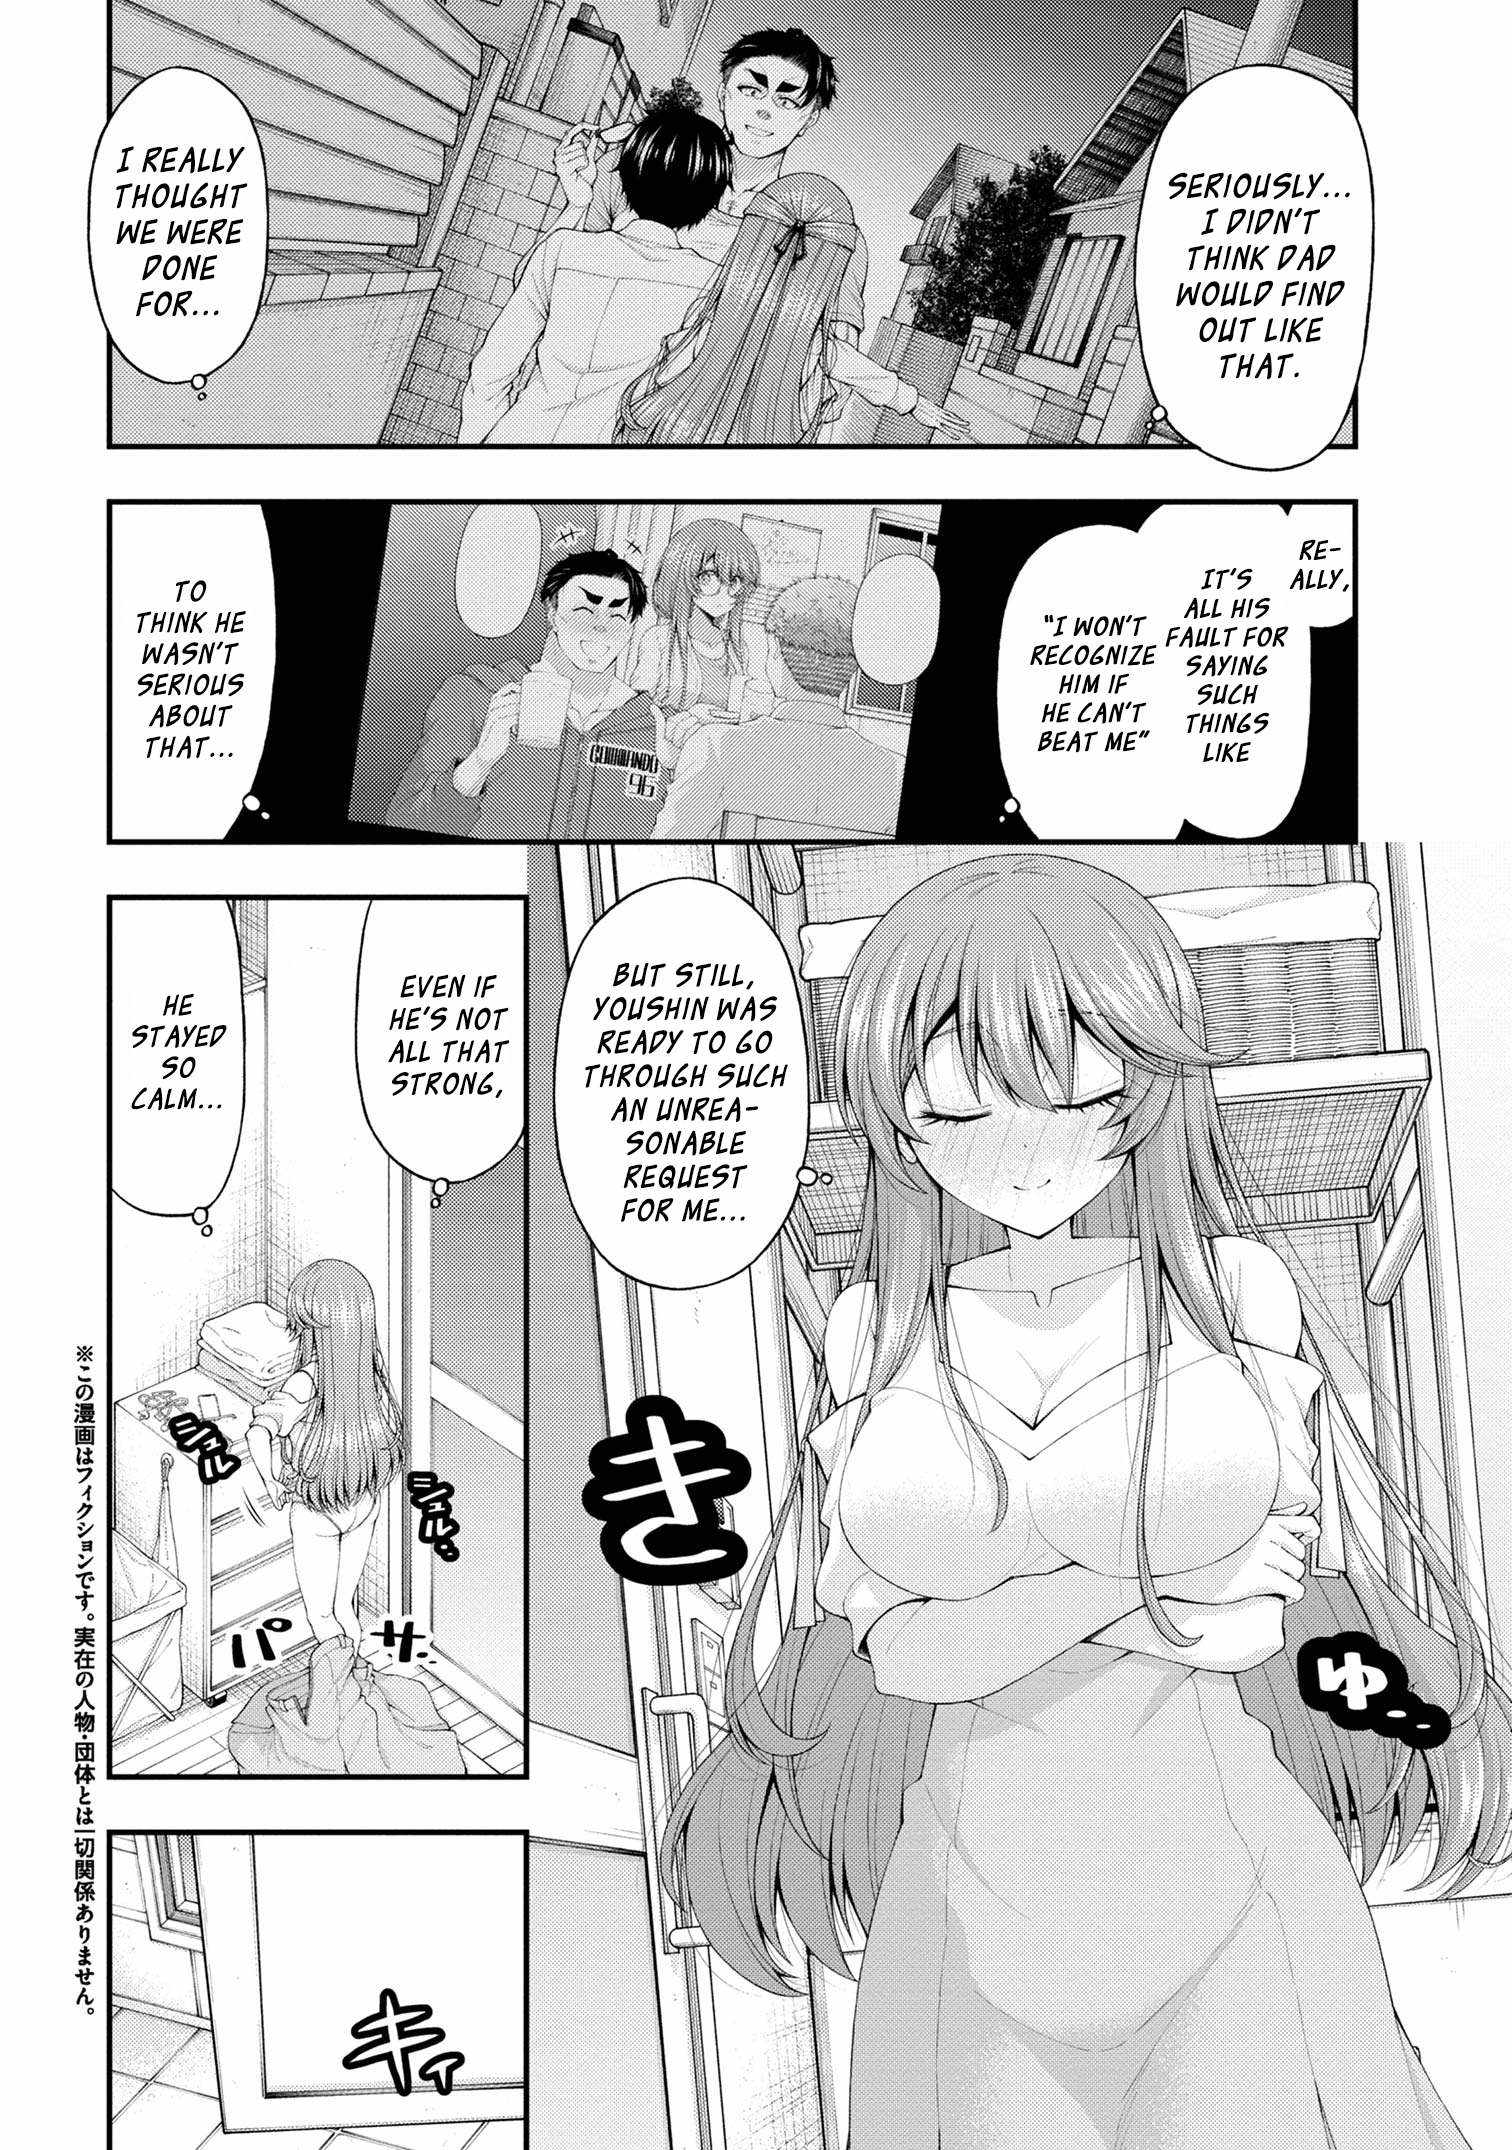 The Gal Who Was Meant to Confess to Me as a Game Punishment Has Apparently Fallen in Love with Me Chapter 12-5-eng-li - Page 1